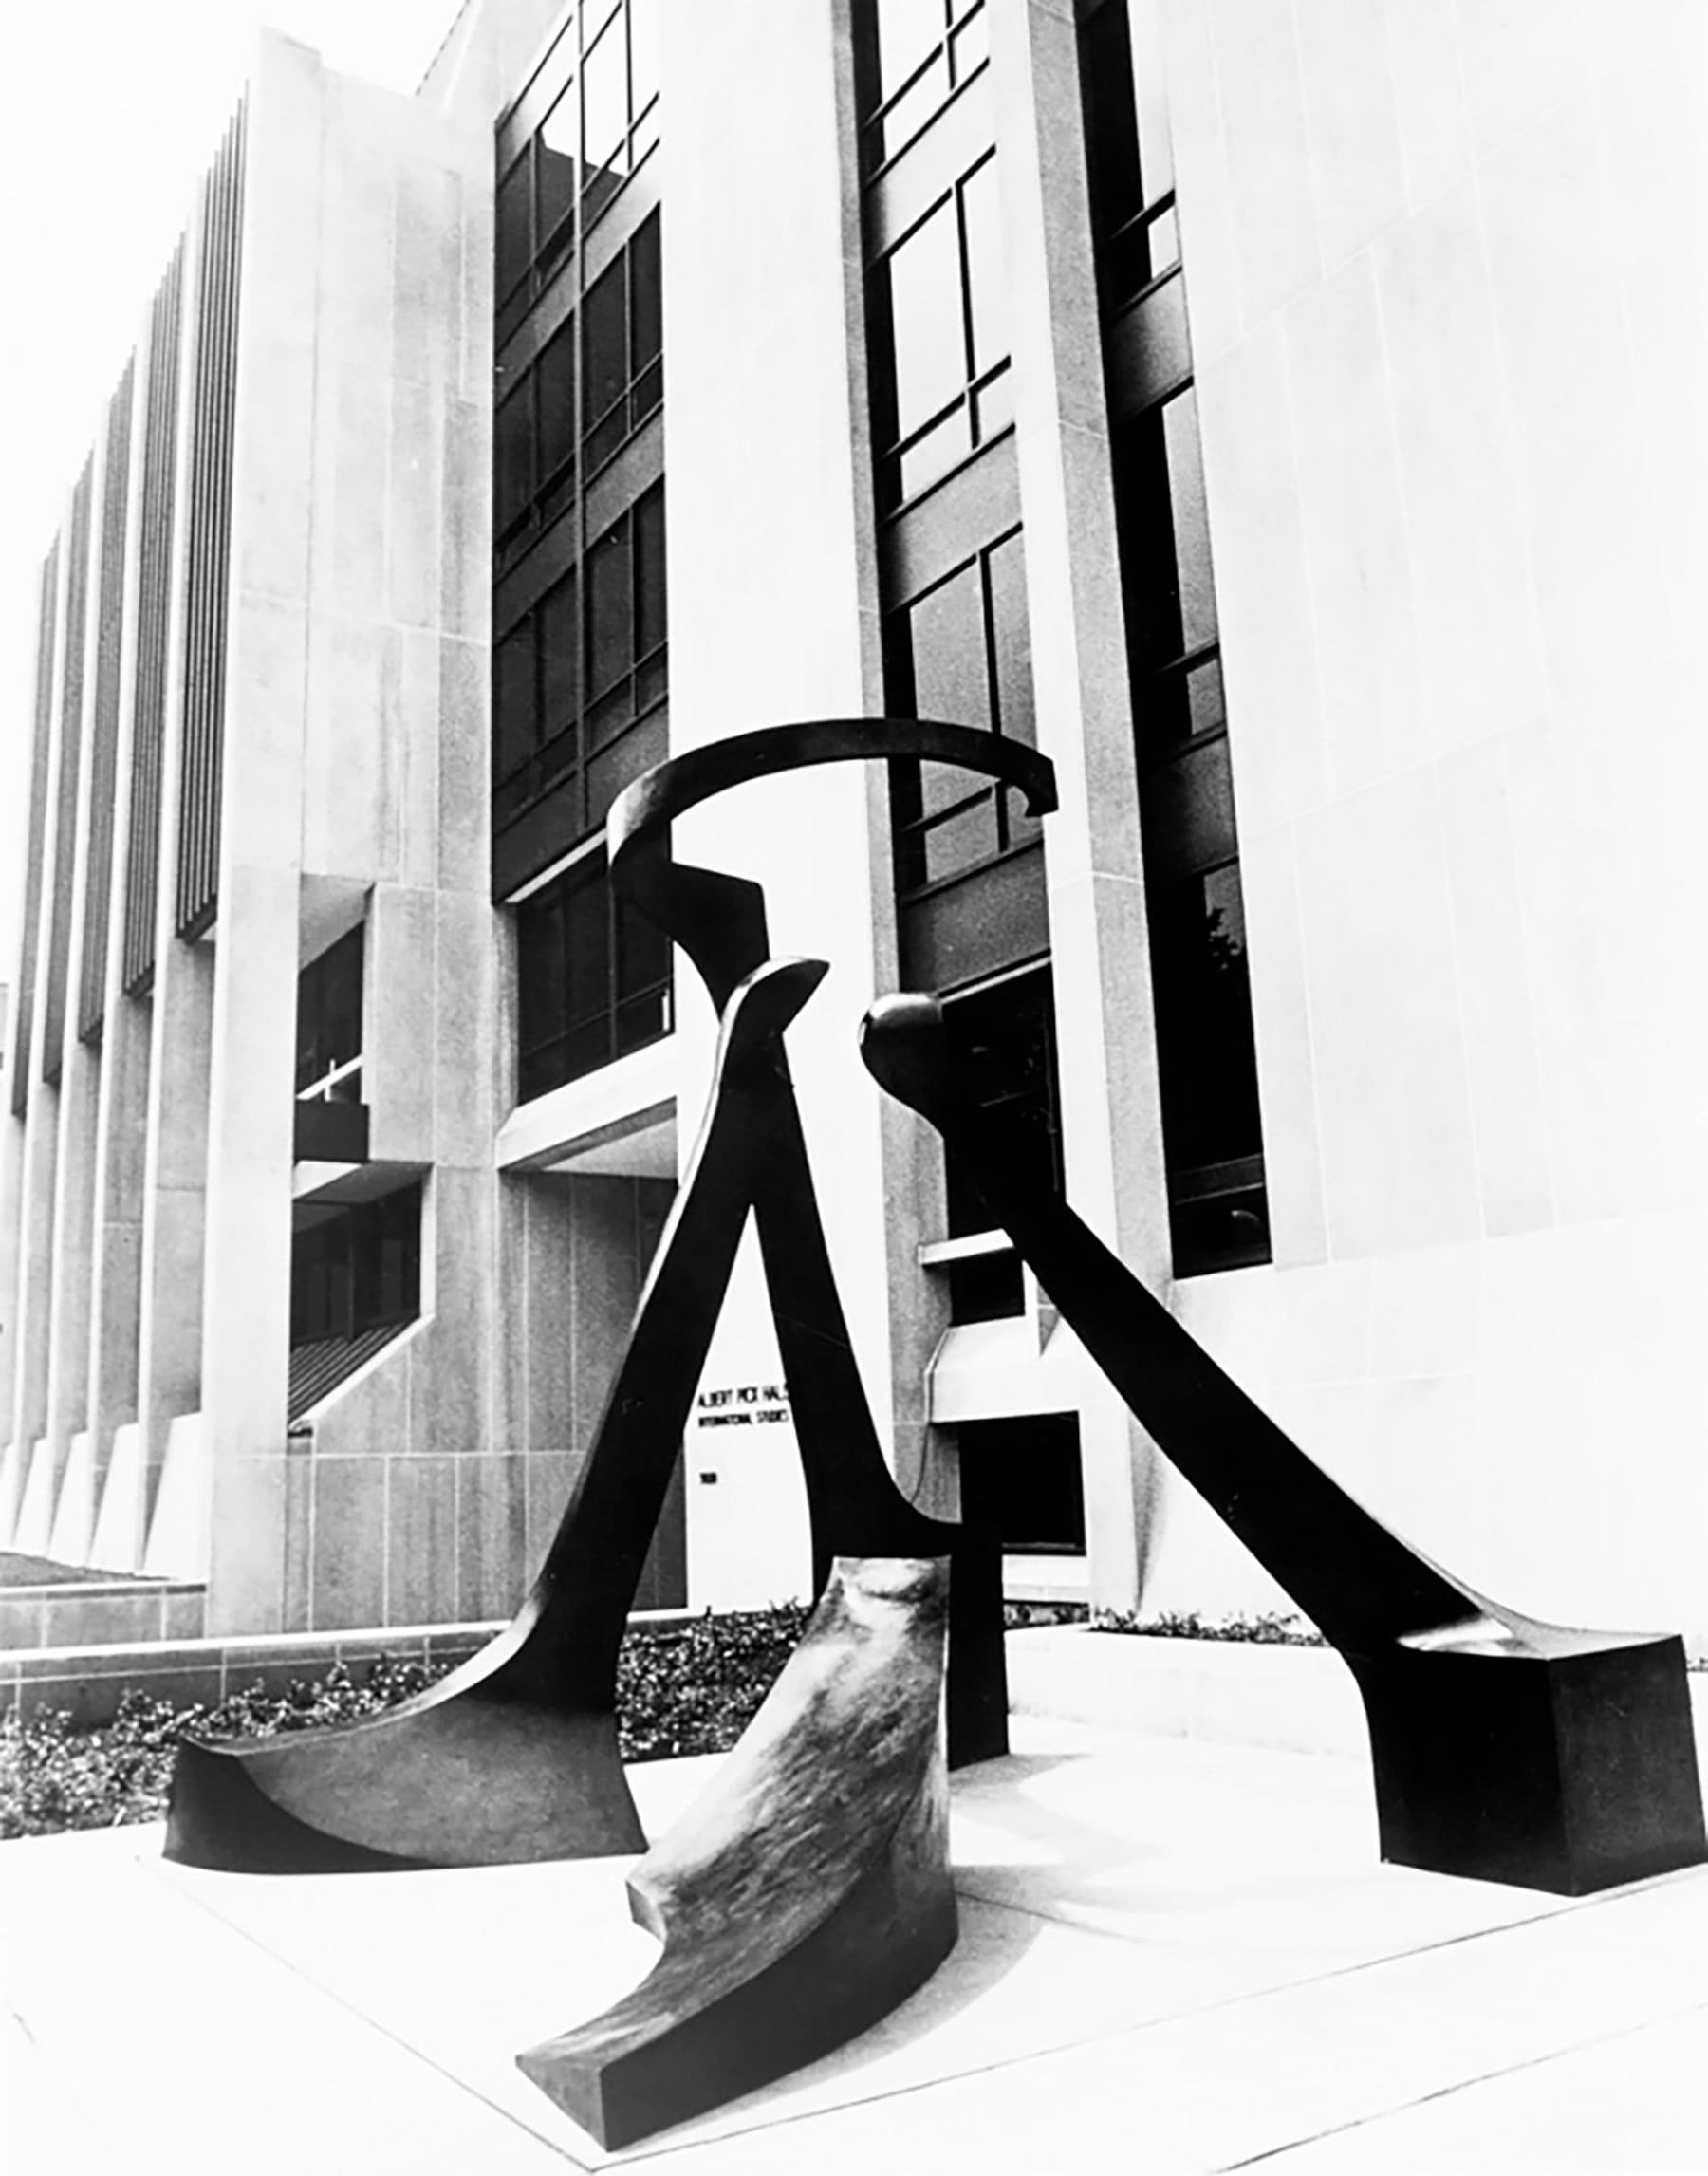 Black and white photo of the Dialogo sculpture